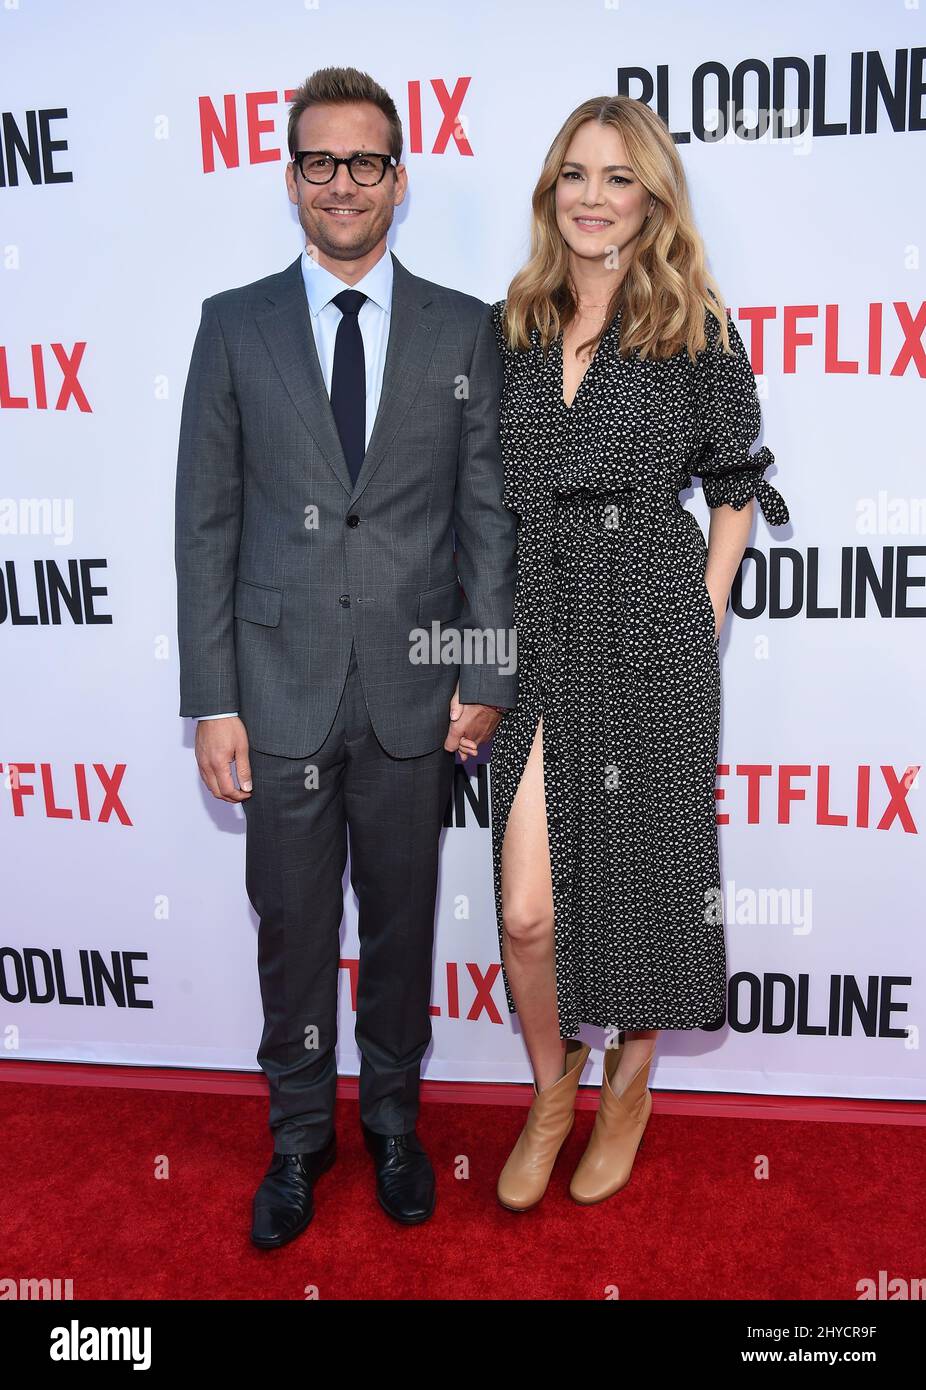 Gabriel Macht and Jacinda Barrett arriving to the Netflix's "Bloodline" Season 3 Premiere Event held at the ArcLight Culver City Stock Photo